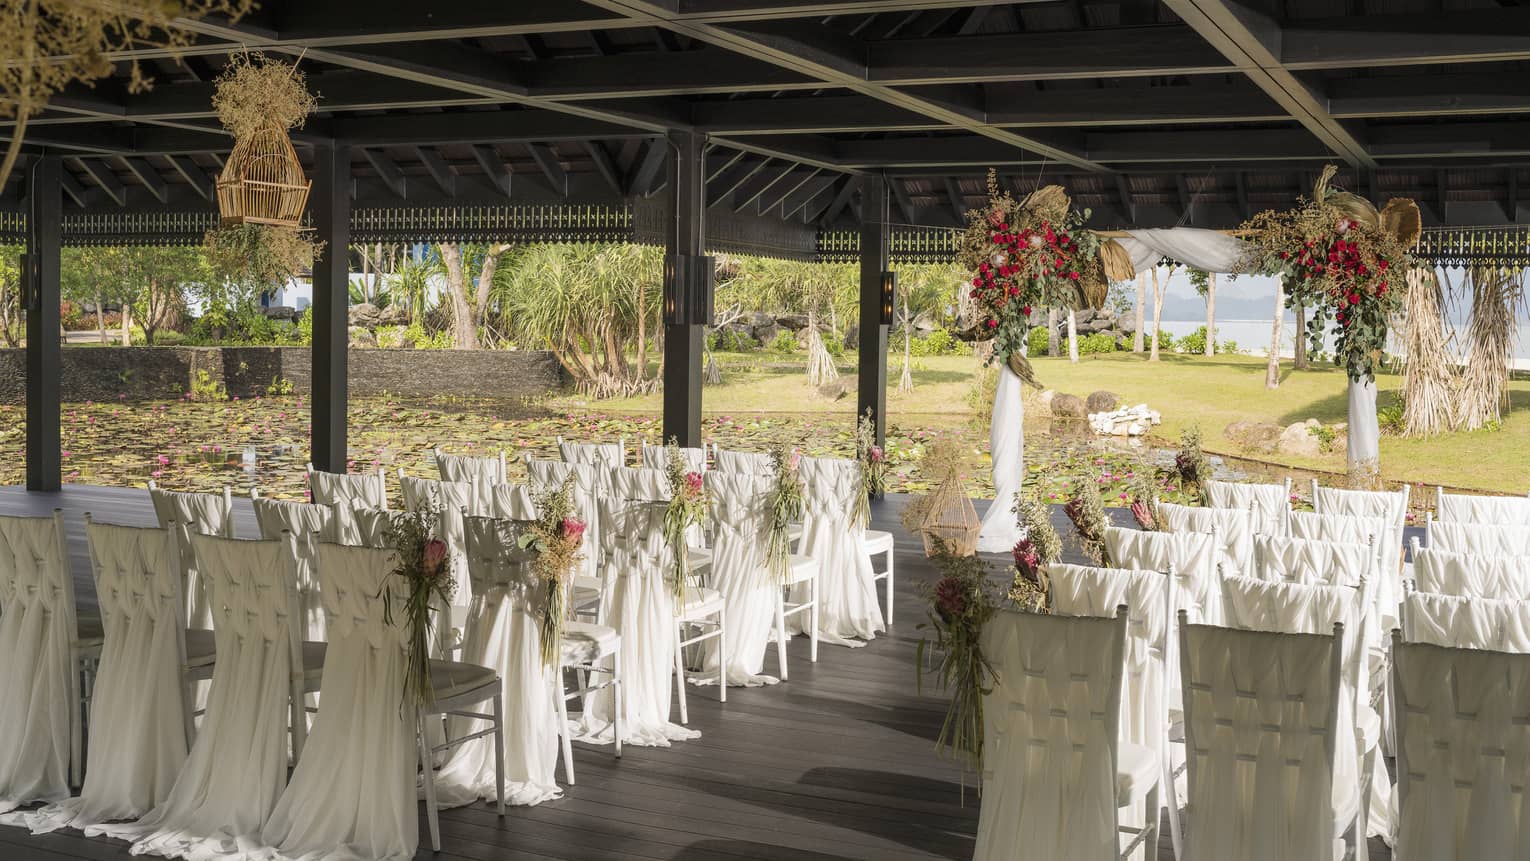 Outdoor wedding reception under pavilion, rows of chairs with white linens 